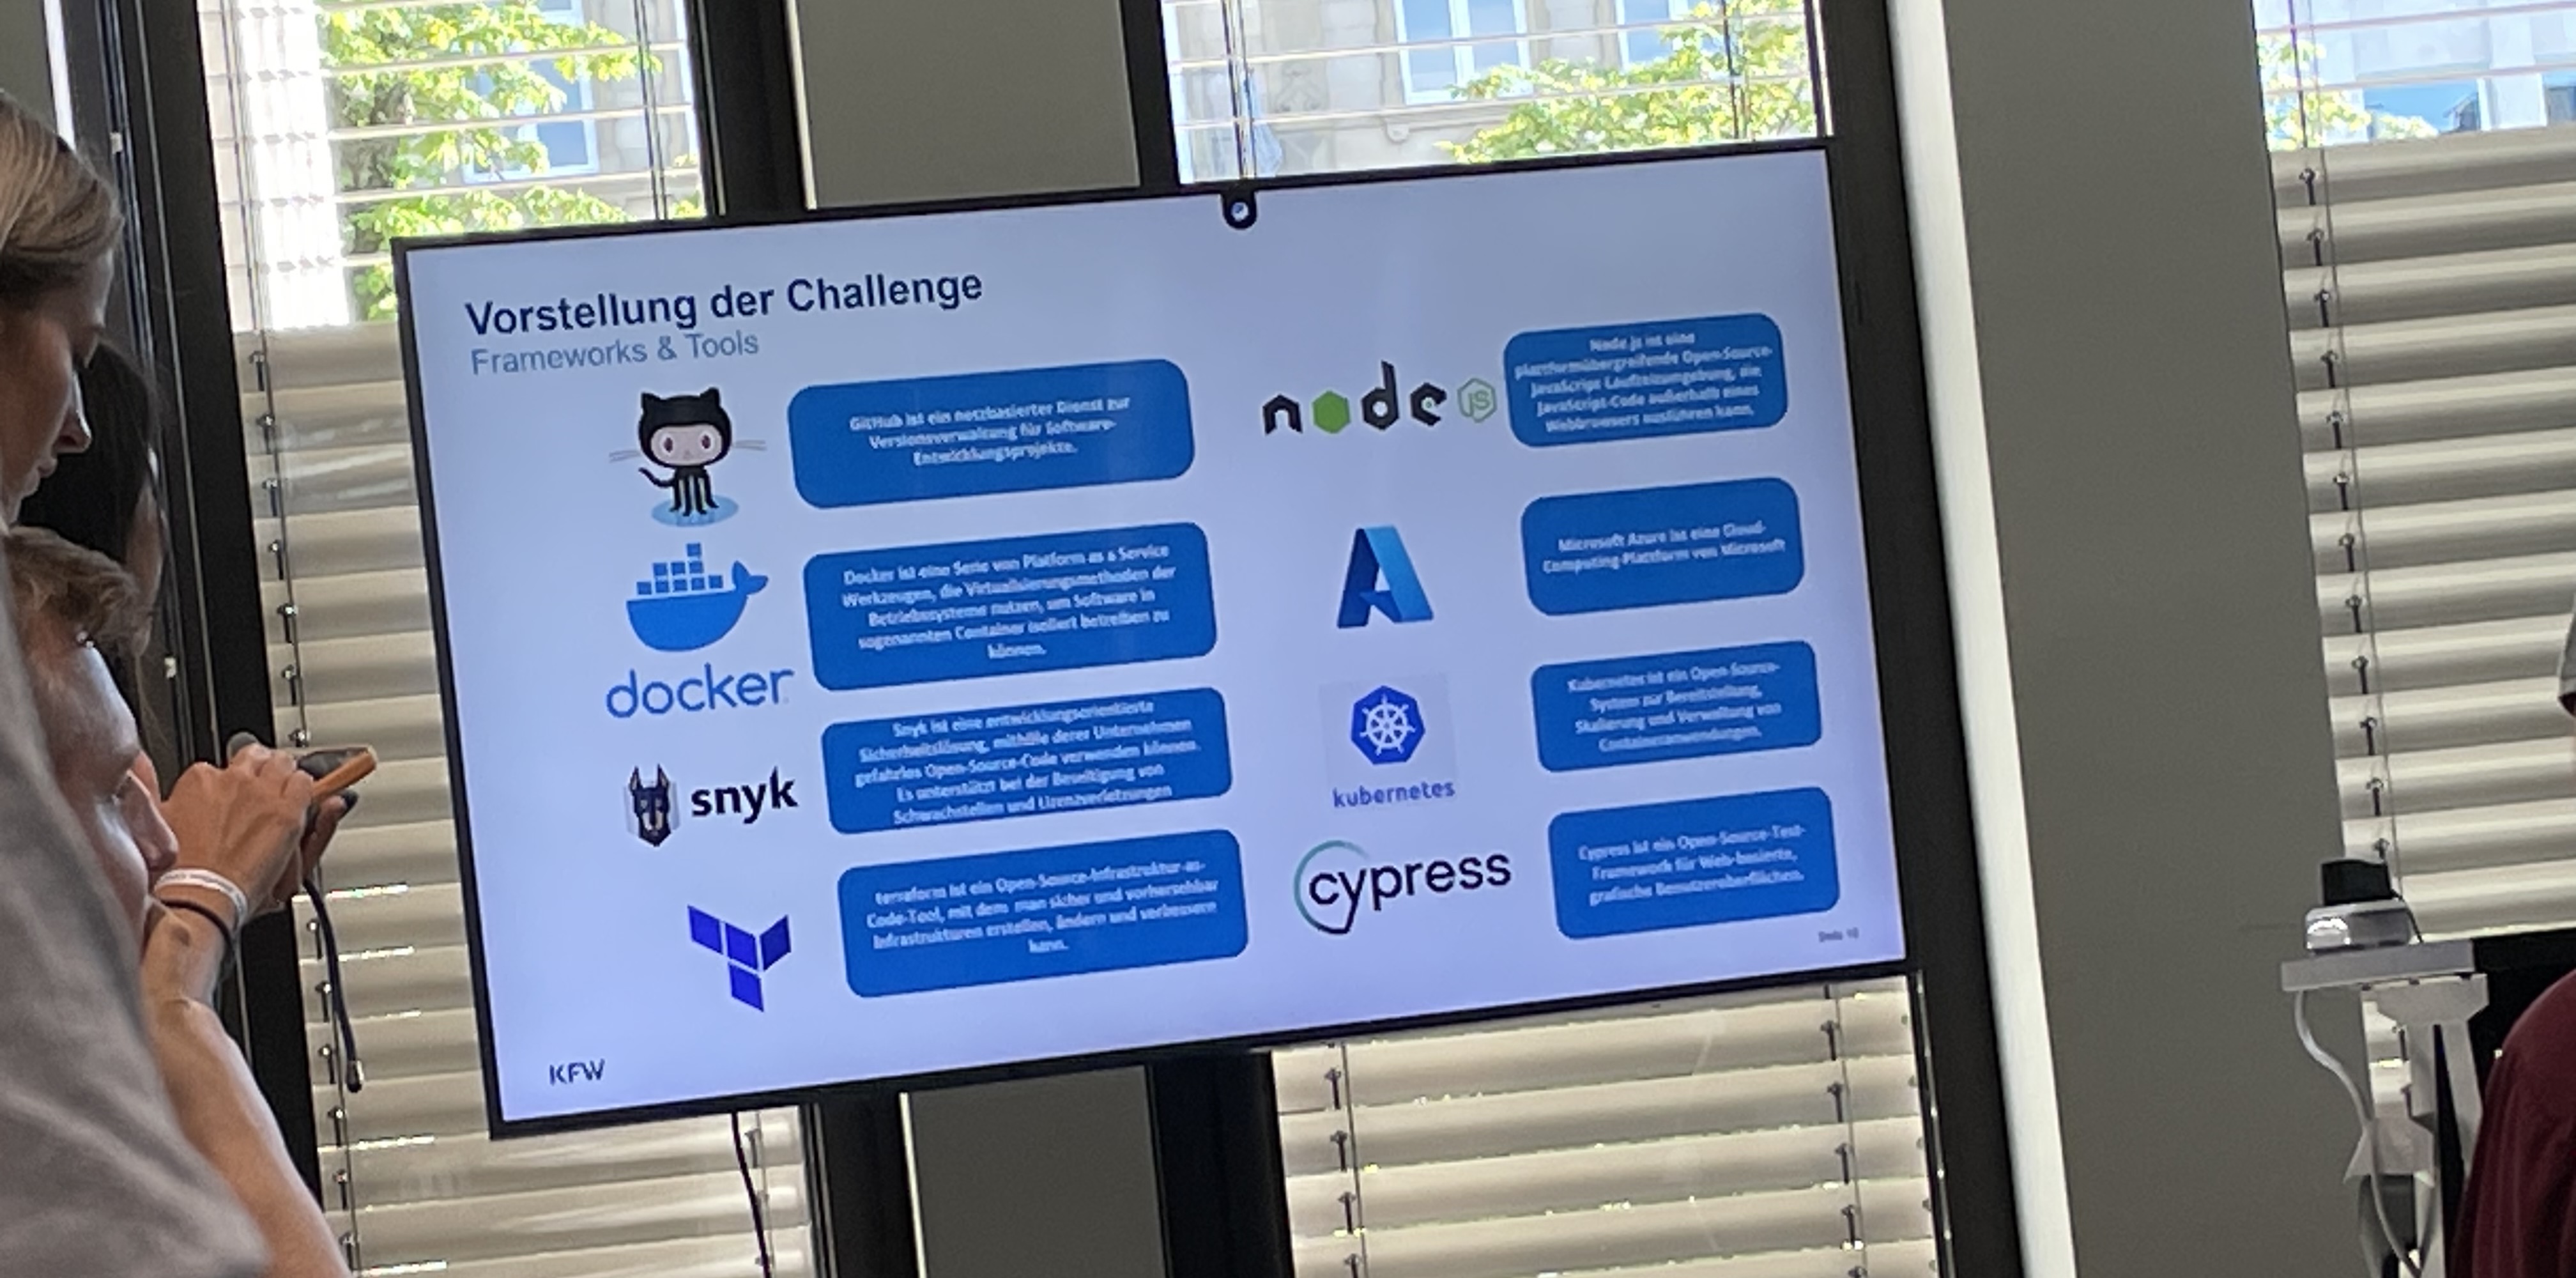 Shows a PowerPoint slide with a list of challenges